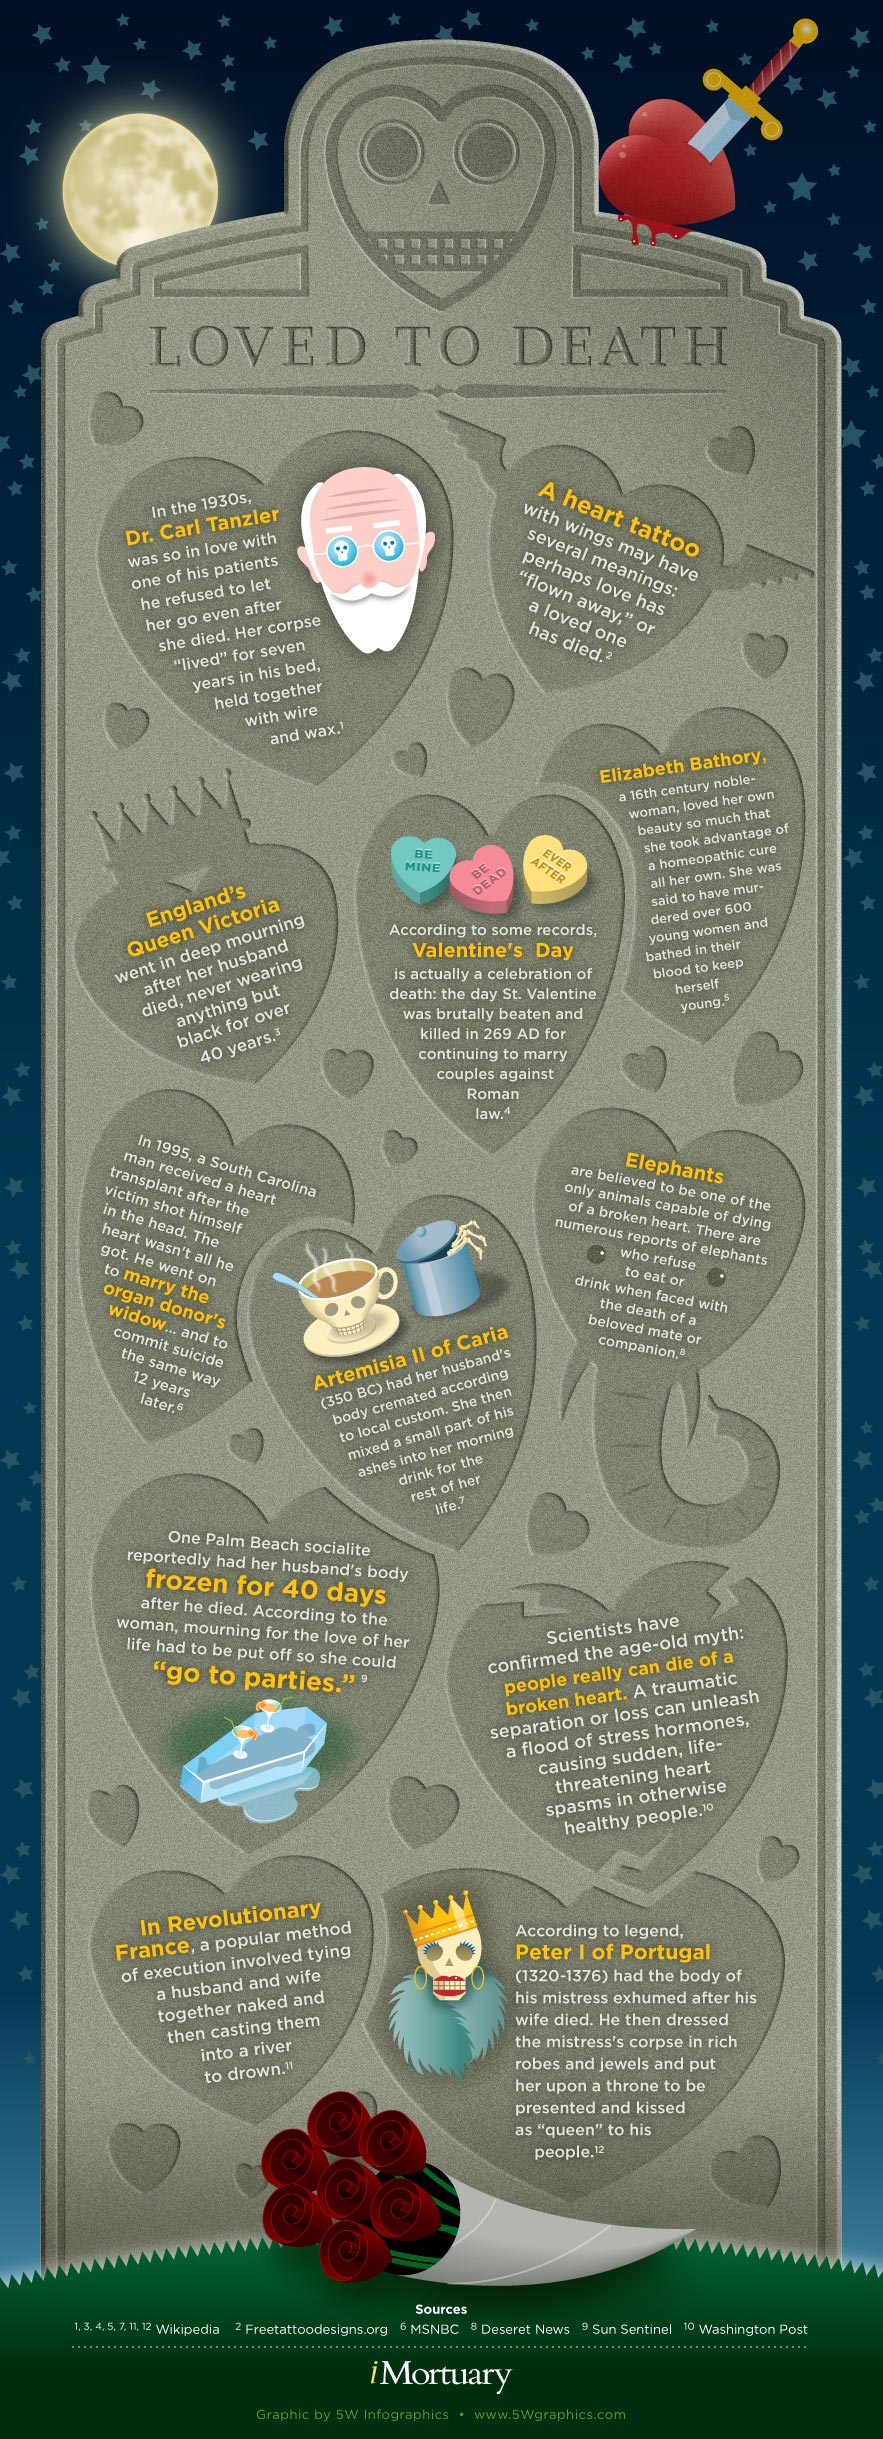 Loved To Death: The Oddness Of A Broken Heart [Infographic]